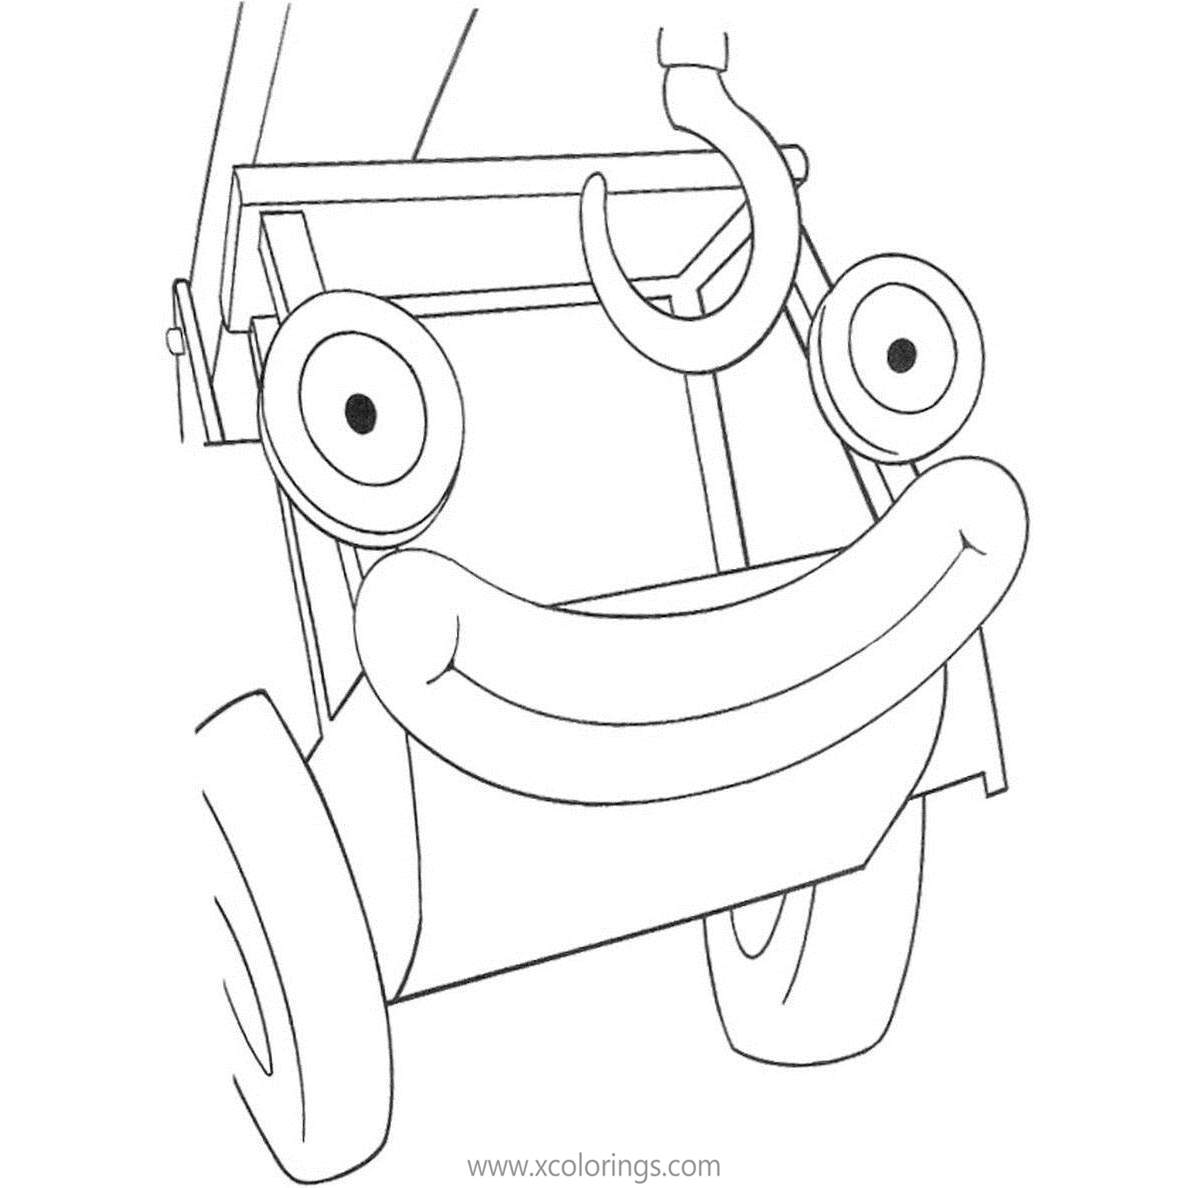 Free Bob the Builder Coloring Pages Lofty is Happy printable